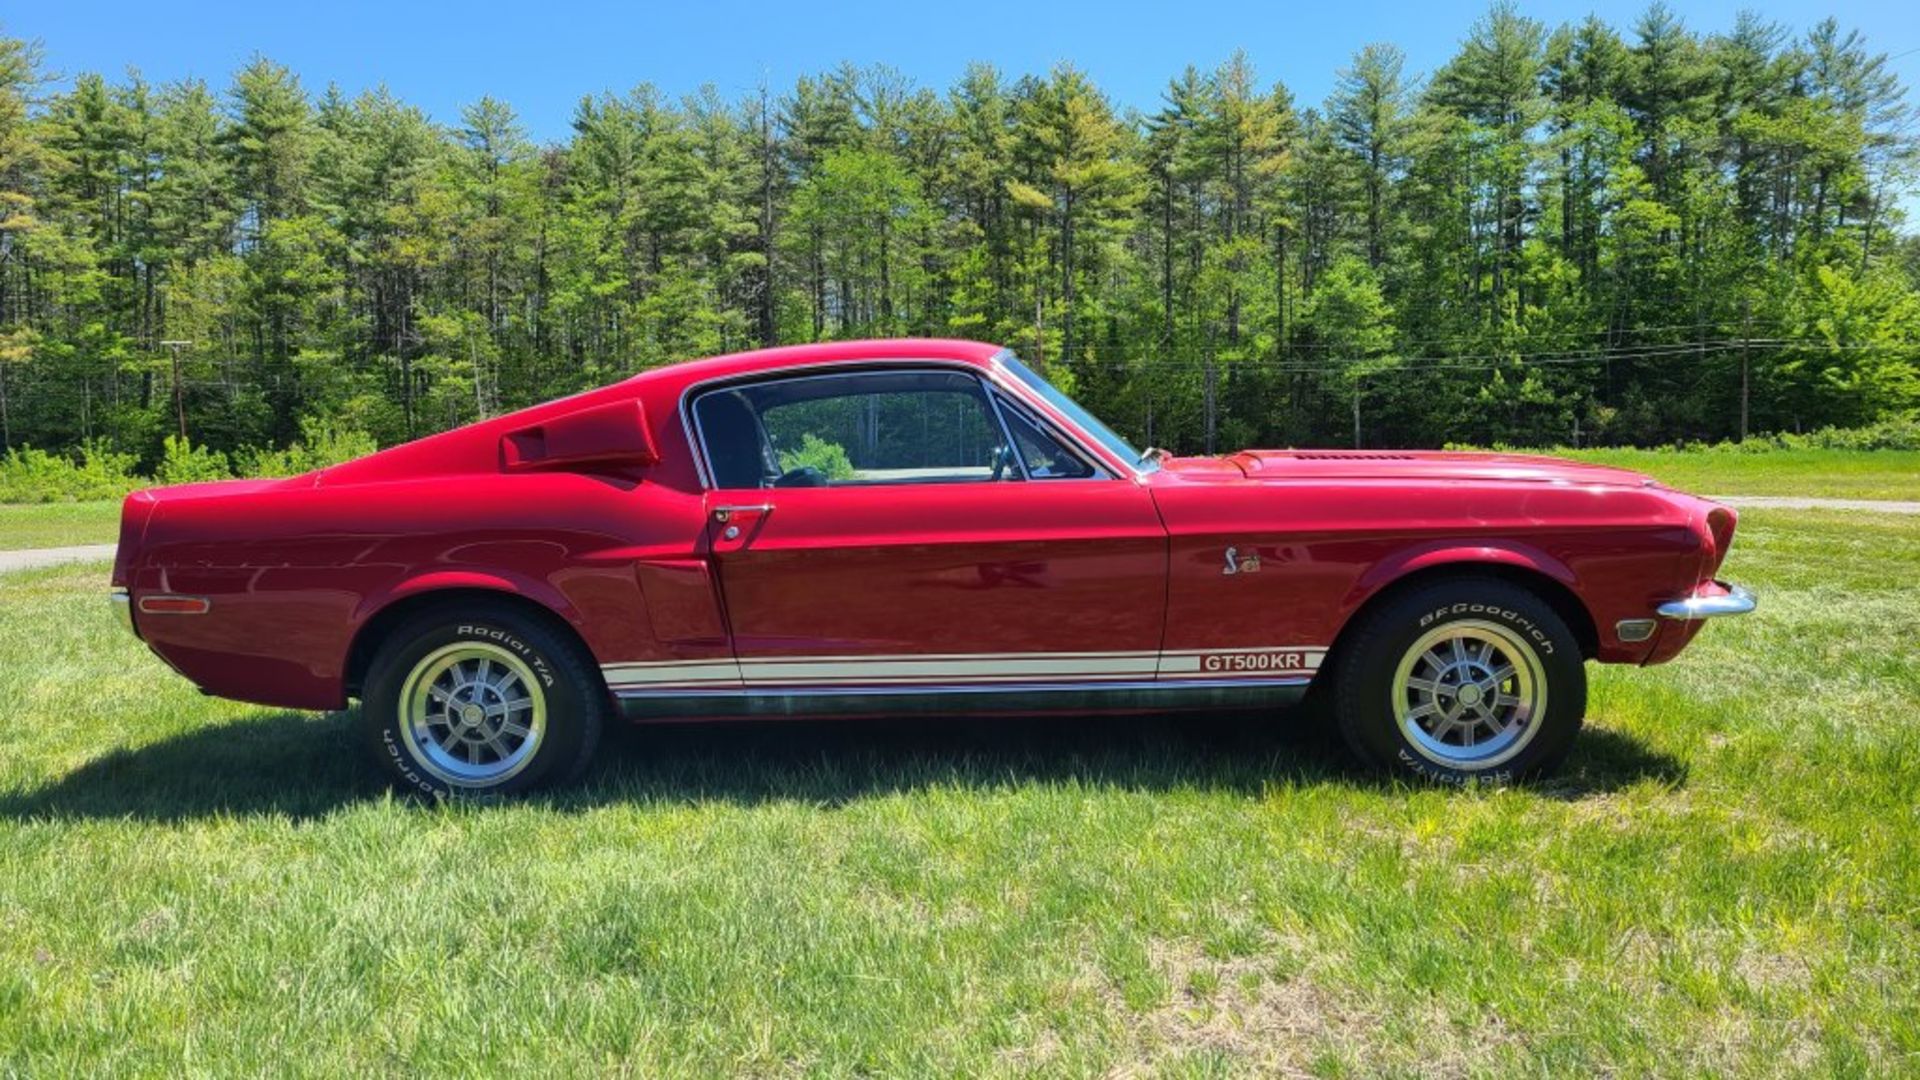 1968 Ford Mustang Gt500kr - Image 3 of 24